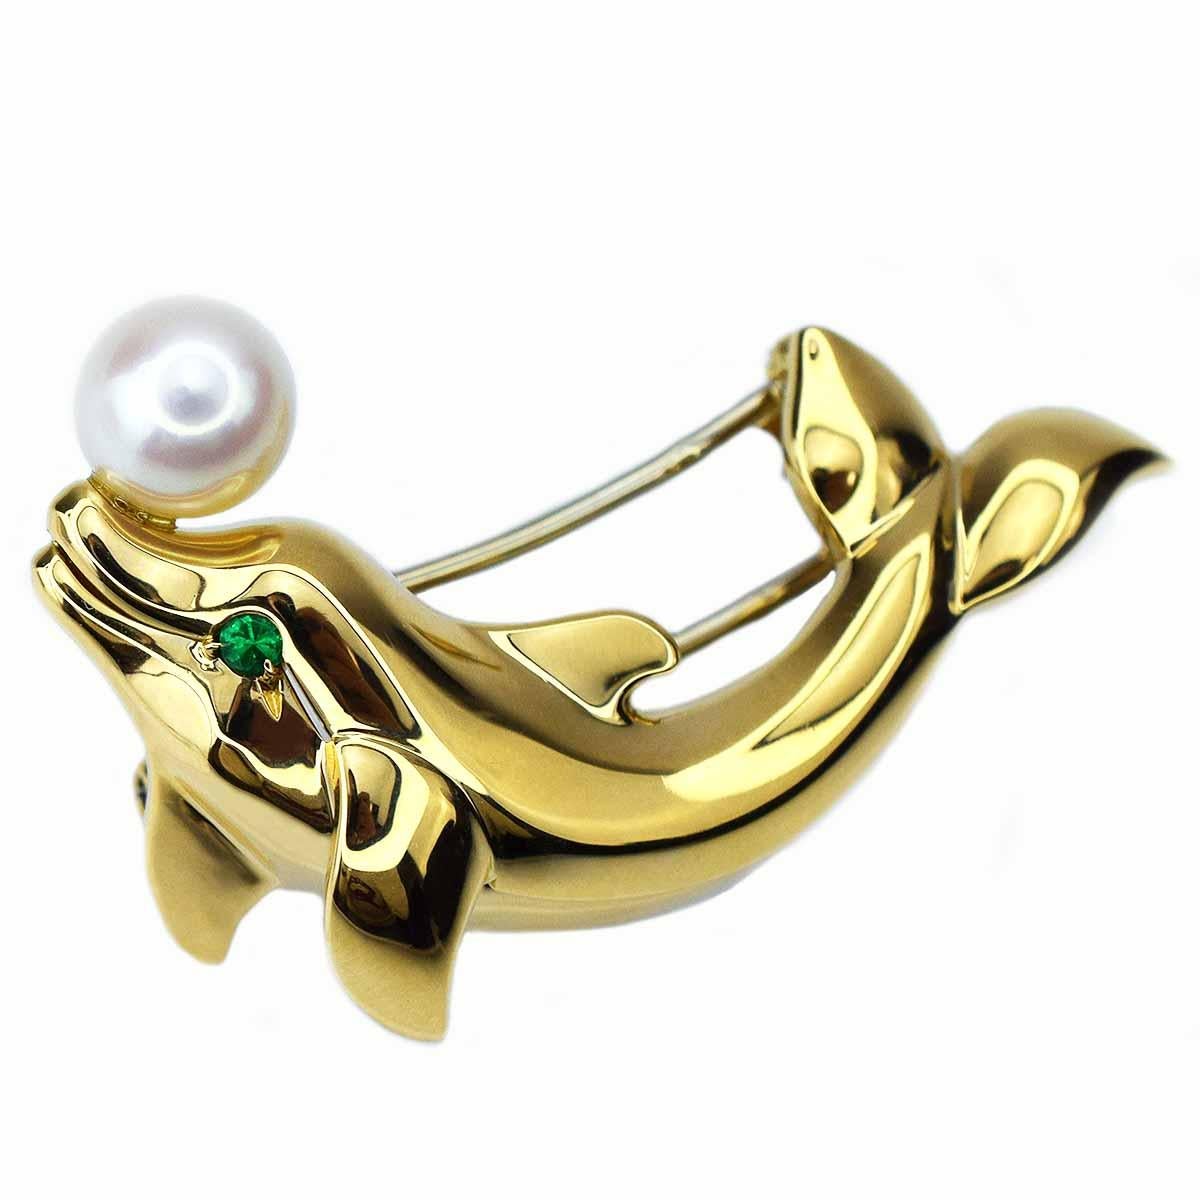 Brand:Cartier
Name:ORFY clip brooch
Material:1P Pearl, 1P Emerald,750 K18 YG Yellow Gold
Weight:14.2g（Approx)
Size（inch）:H17.14mm×W40mm / H0.67in×W1.57in（Approx)
Comes with:Cartier Box, Case(Scratched) , Cartier Certificate (May 2000), Cartier